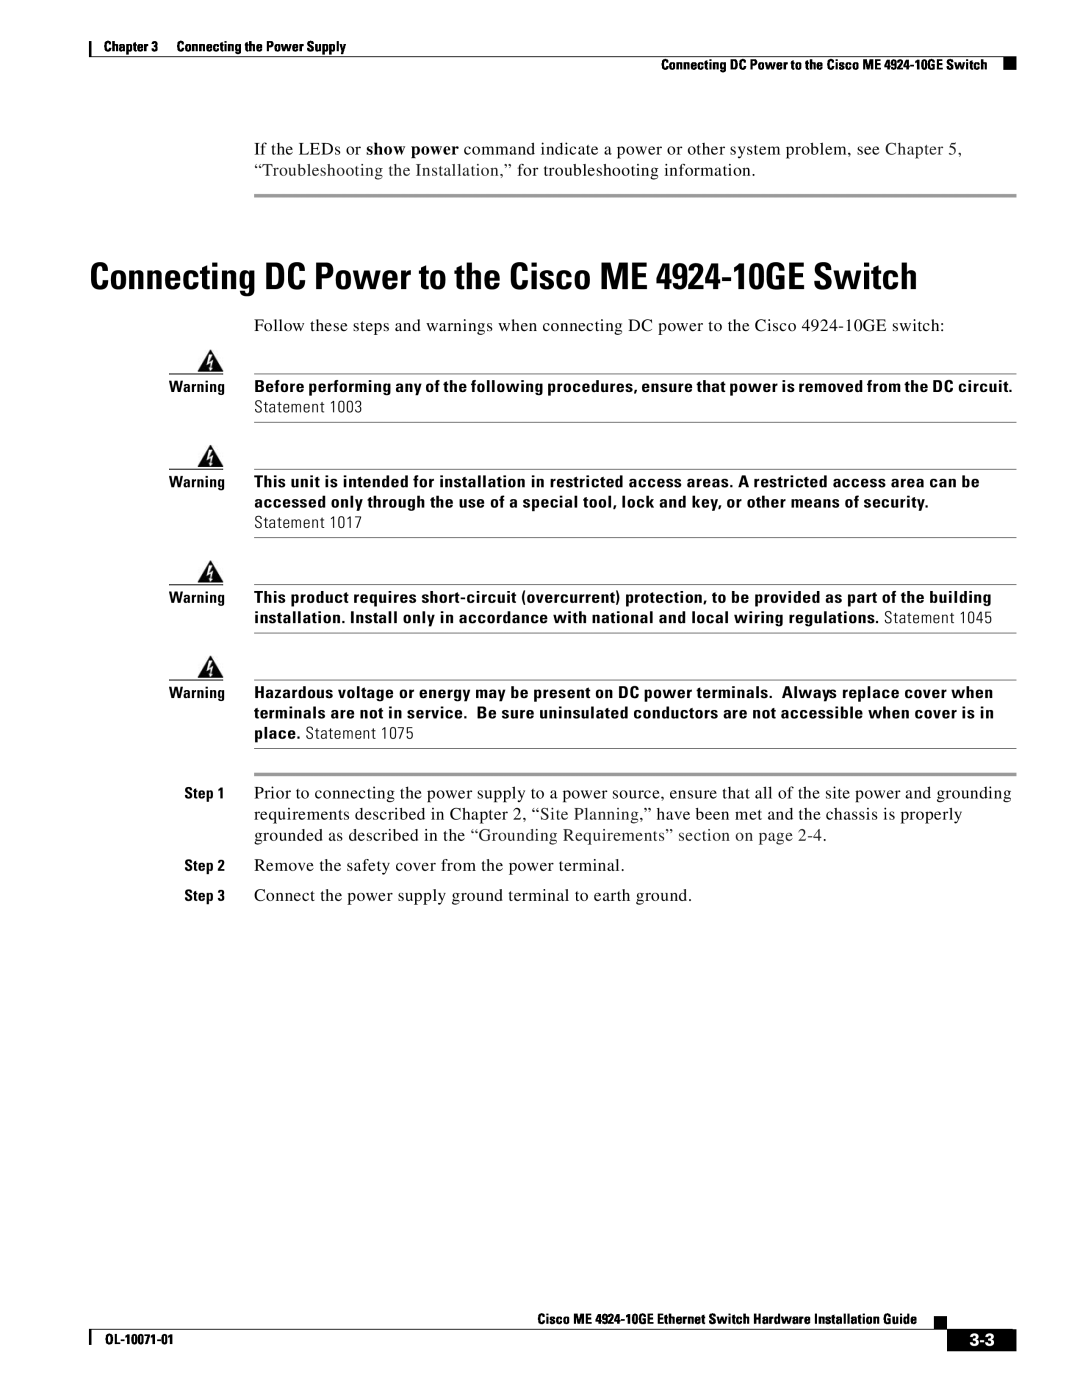 Cisco Systems manual Connecting DC Power to the Cisco ME 4924-10GE Switch 